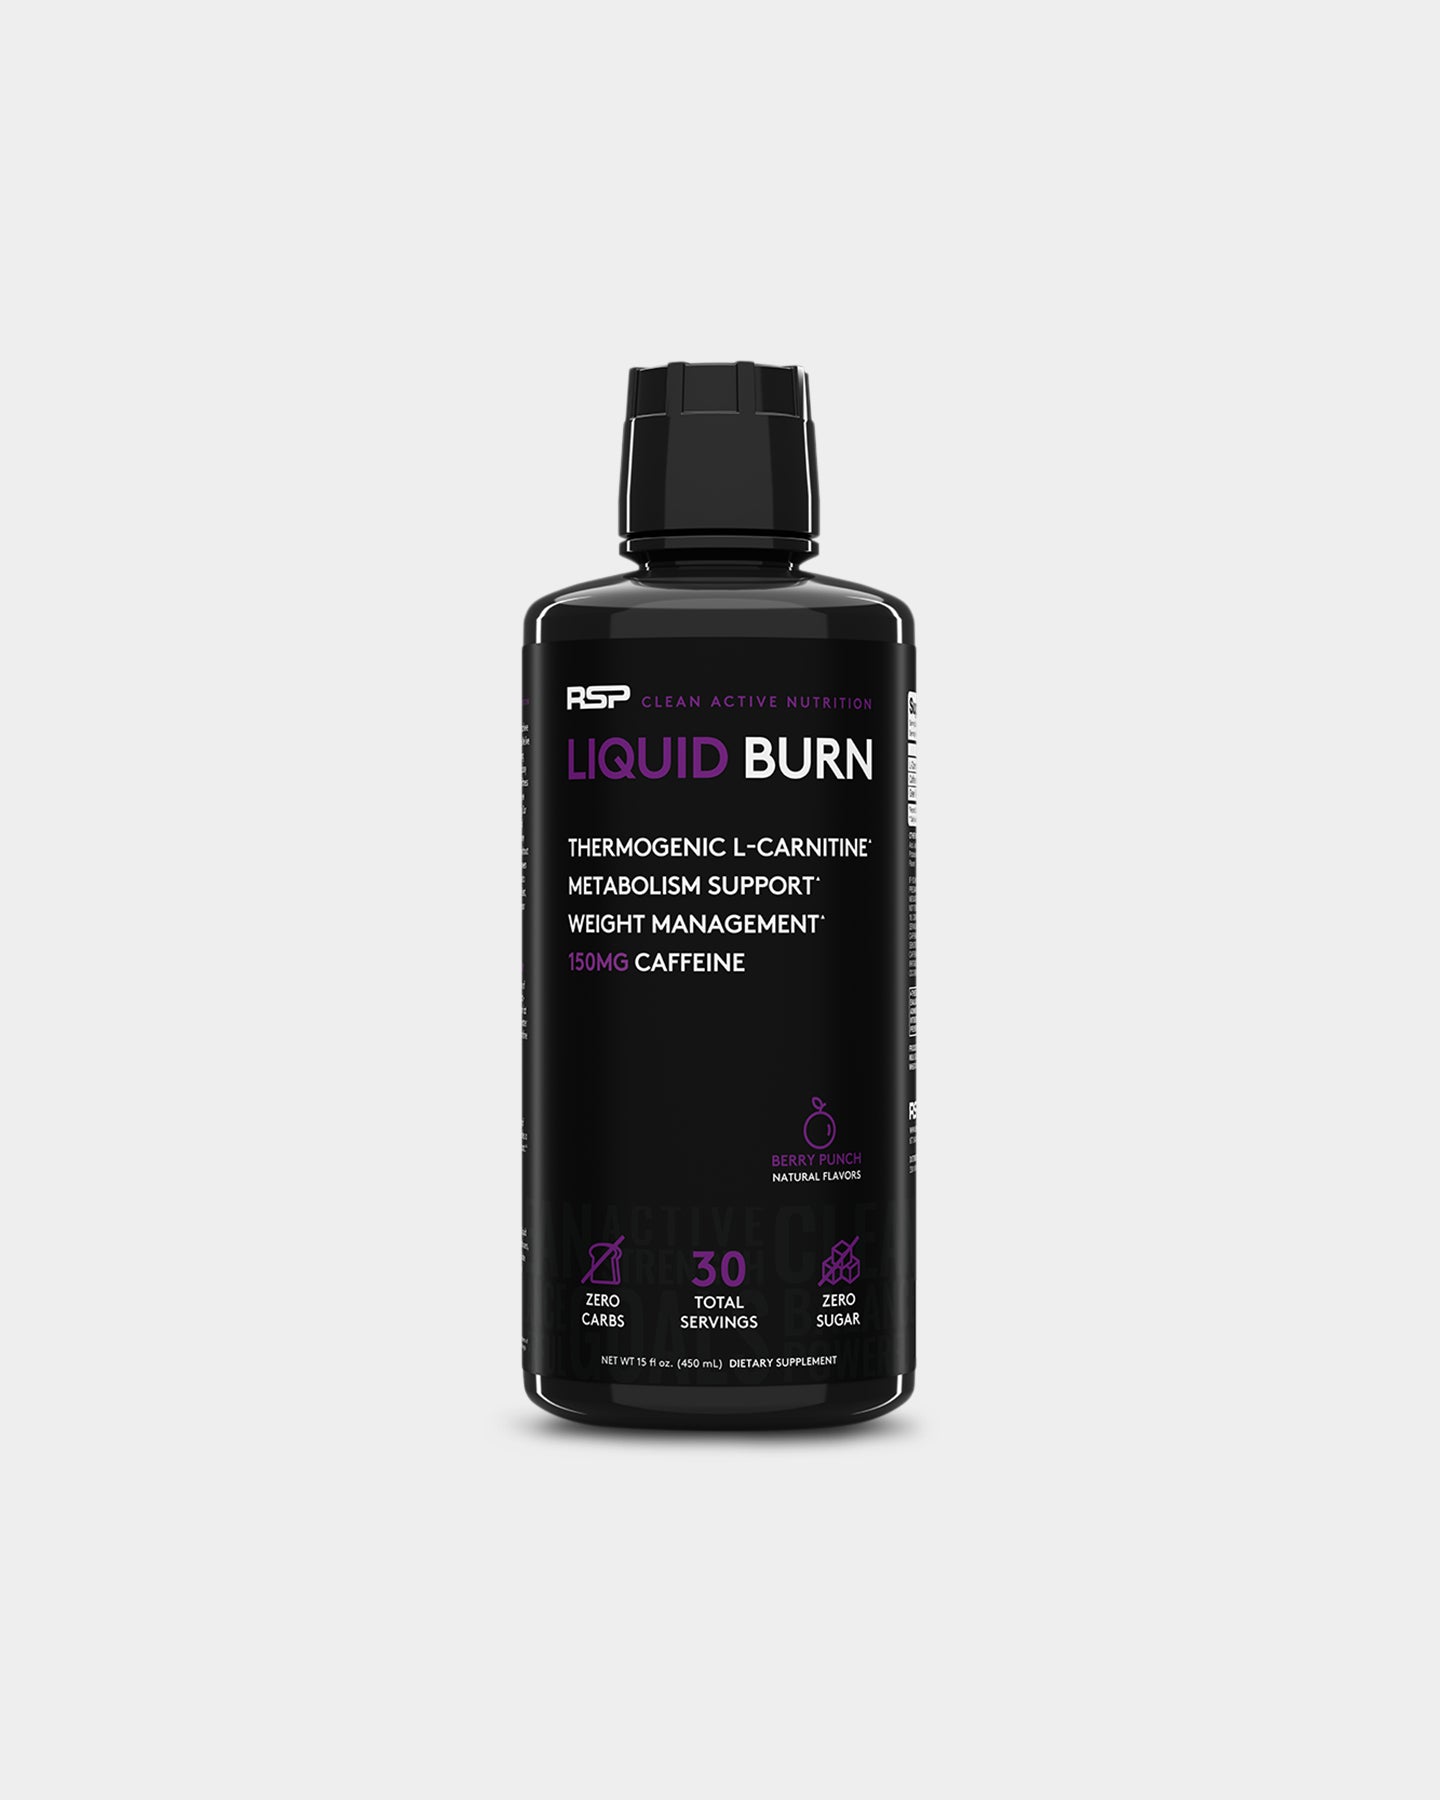 Image of RSP Nutrition Liquid Burn Thermogenic L-Carnitine